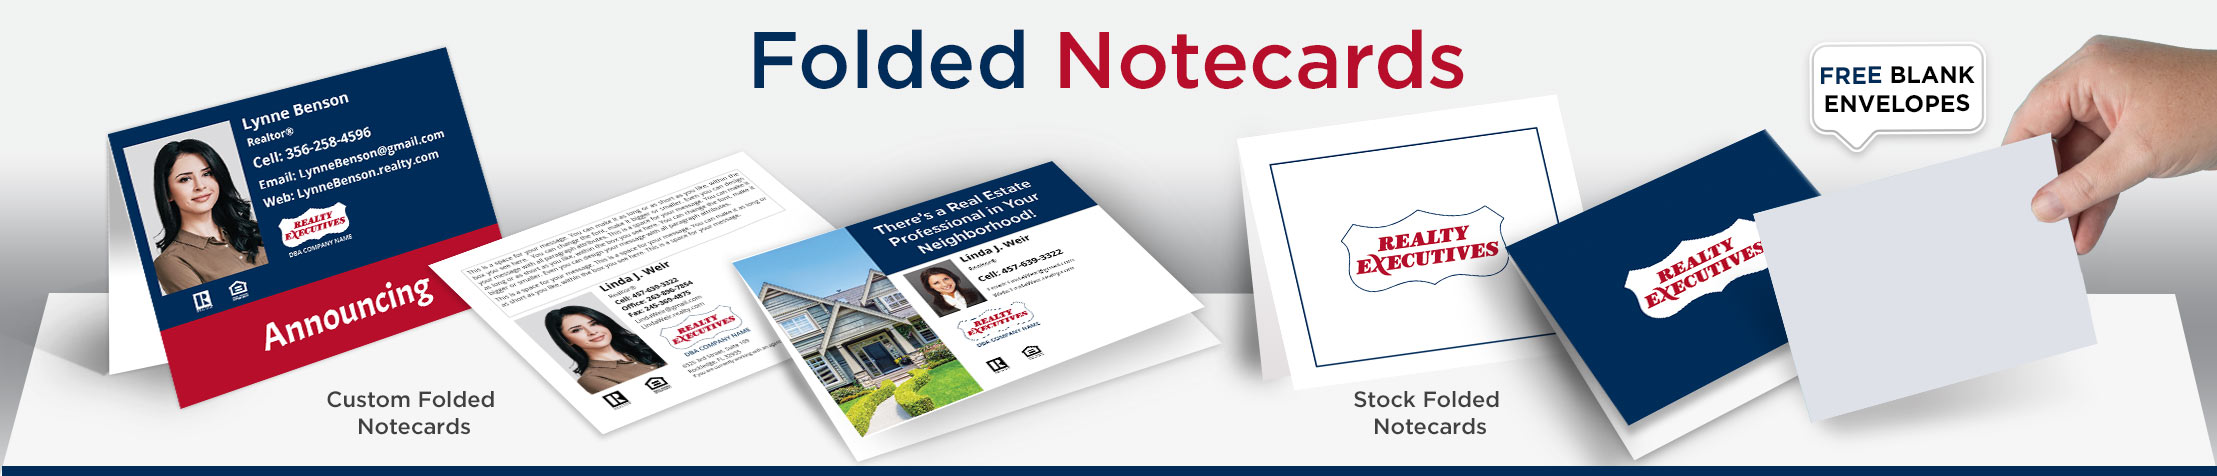 Realty Executives Real Estate Postcards -  postcard templates and direct mail postcard mailing services | BestPrintBuy.com